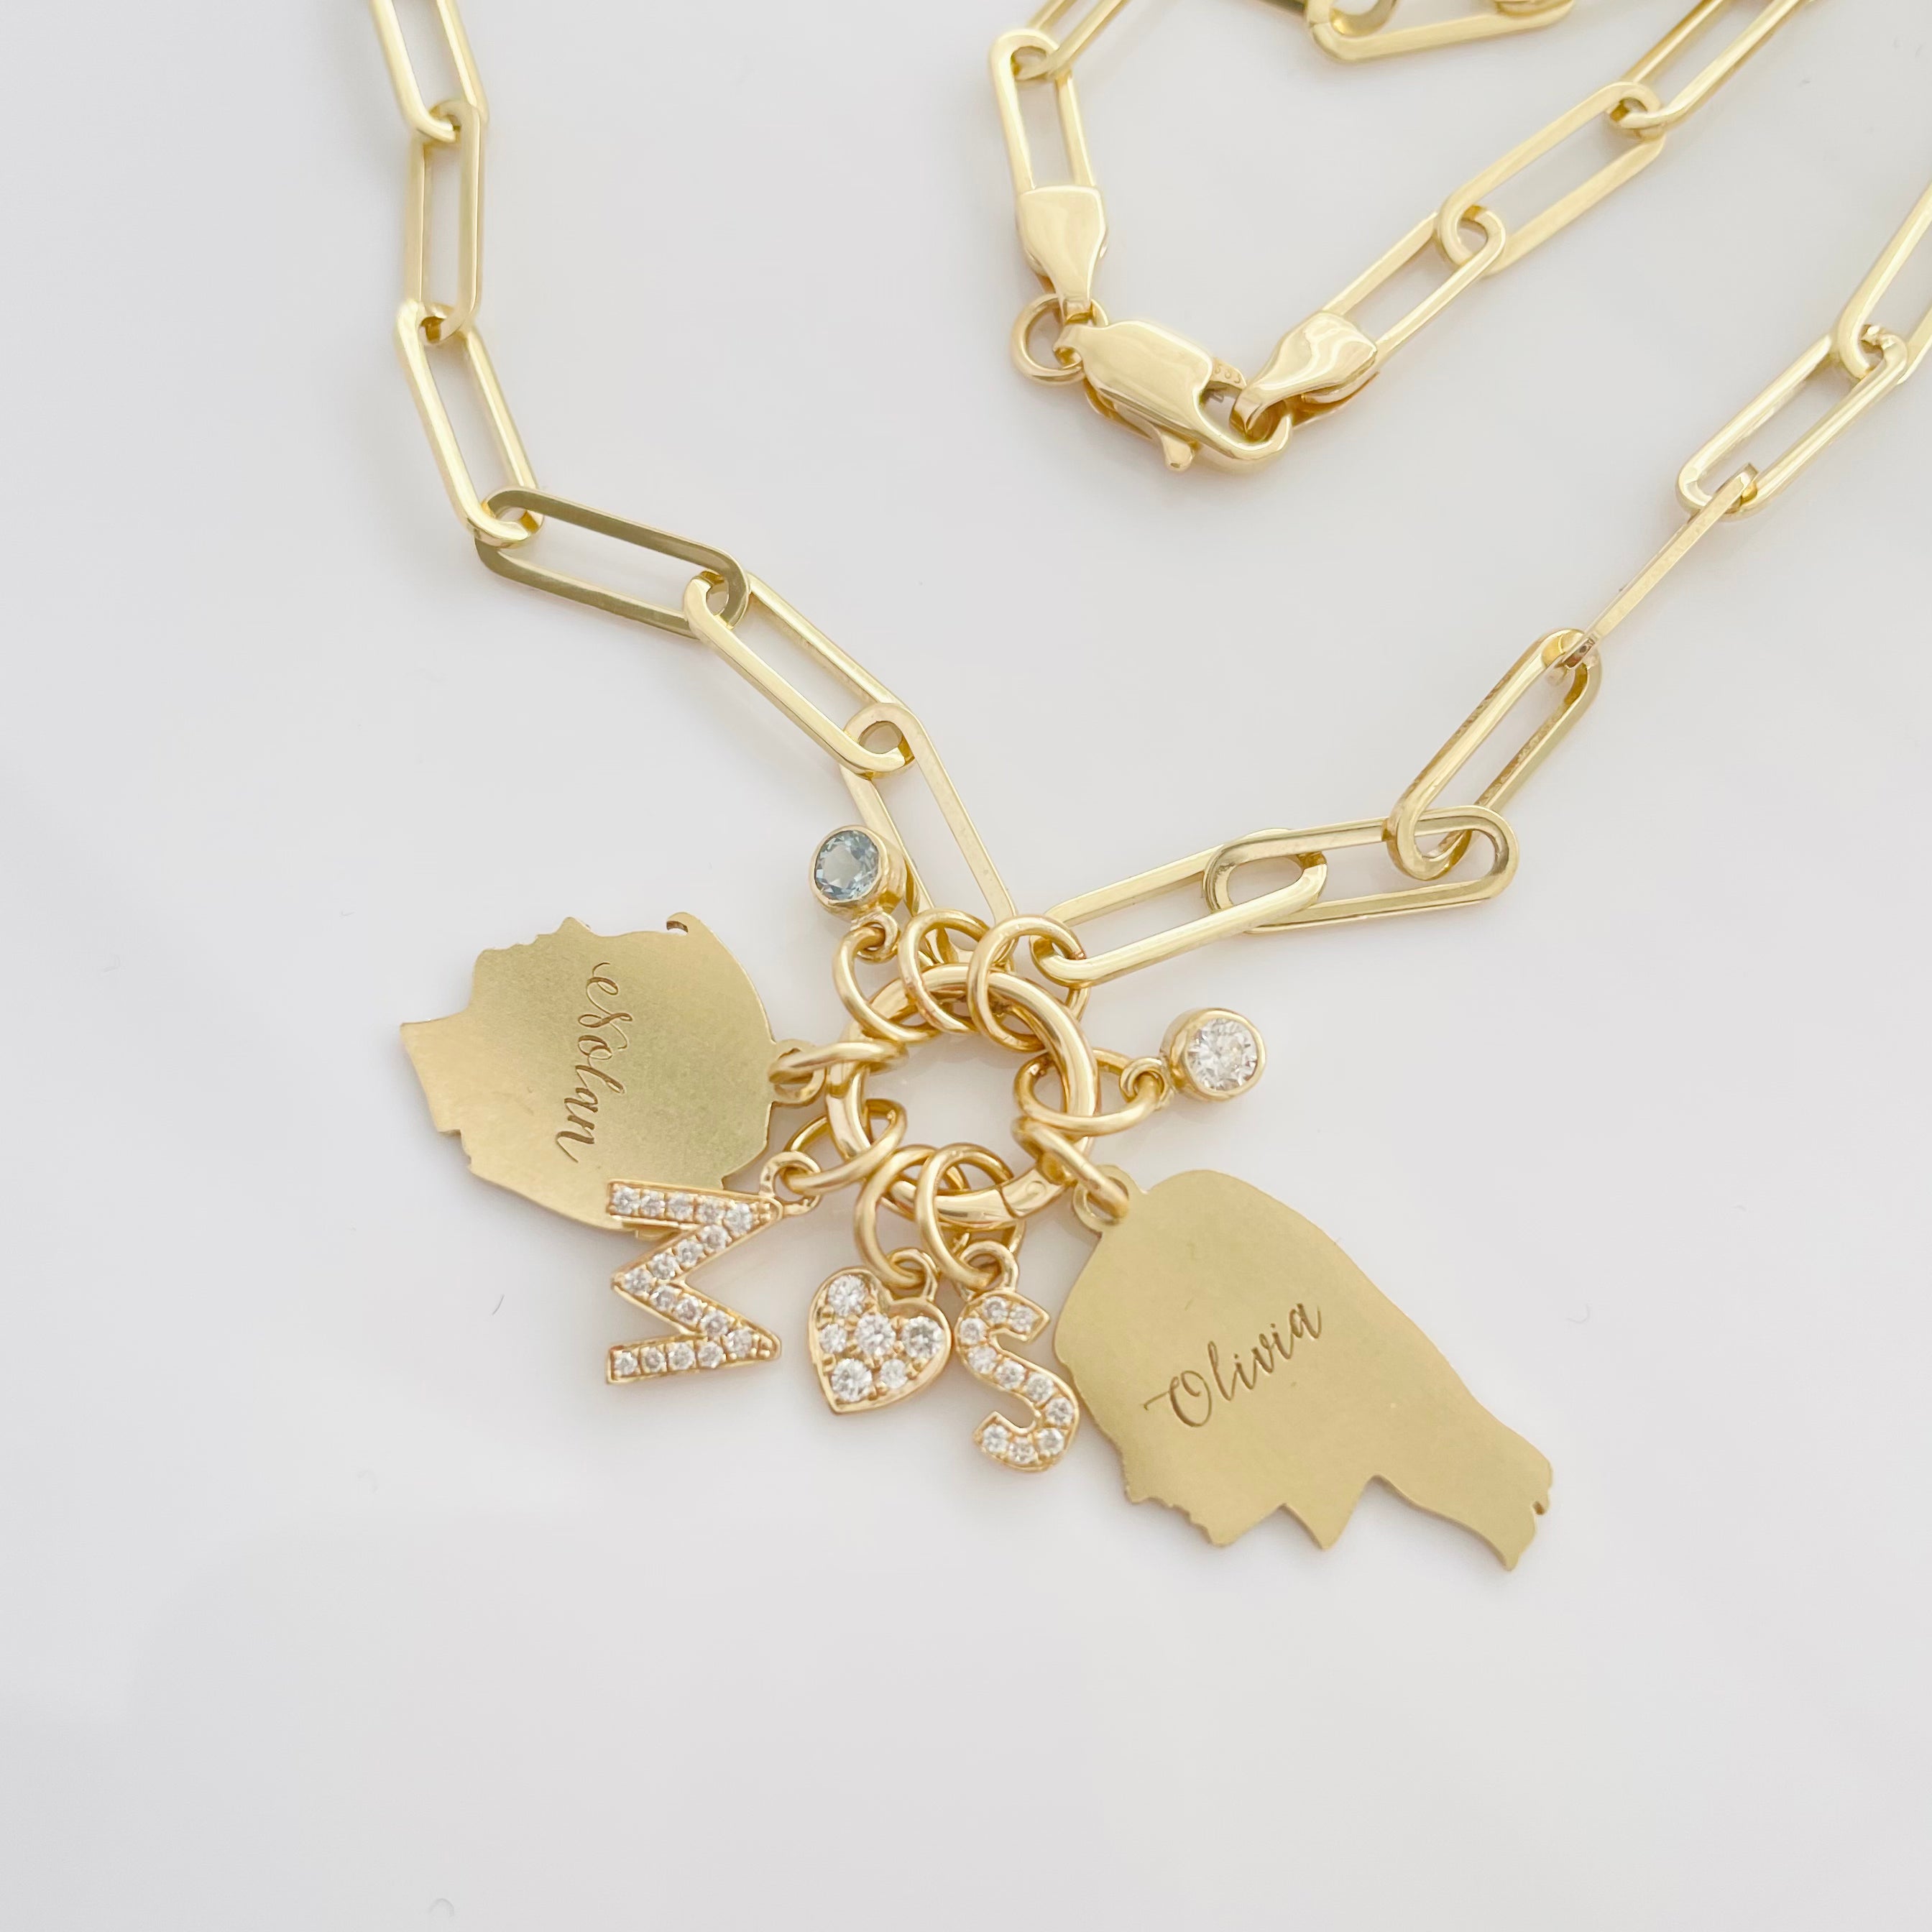 Stunning 14K Gold Charm Necklace - Build Your Own Necklace!